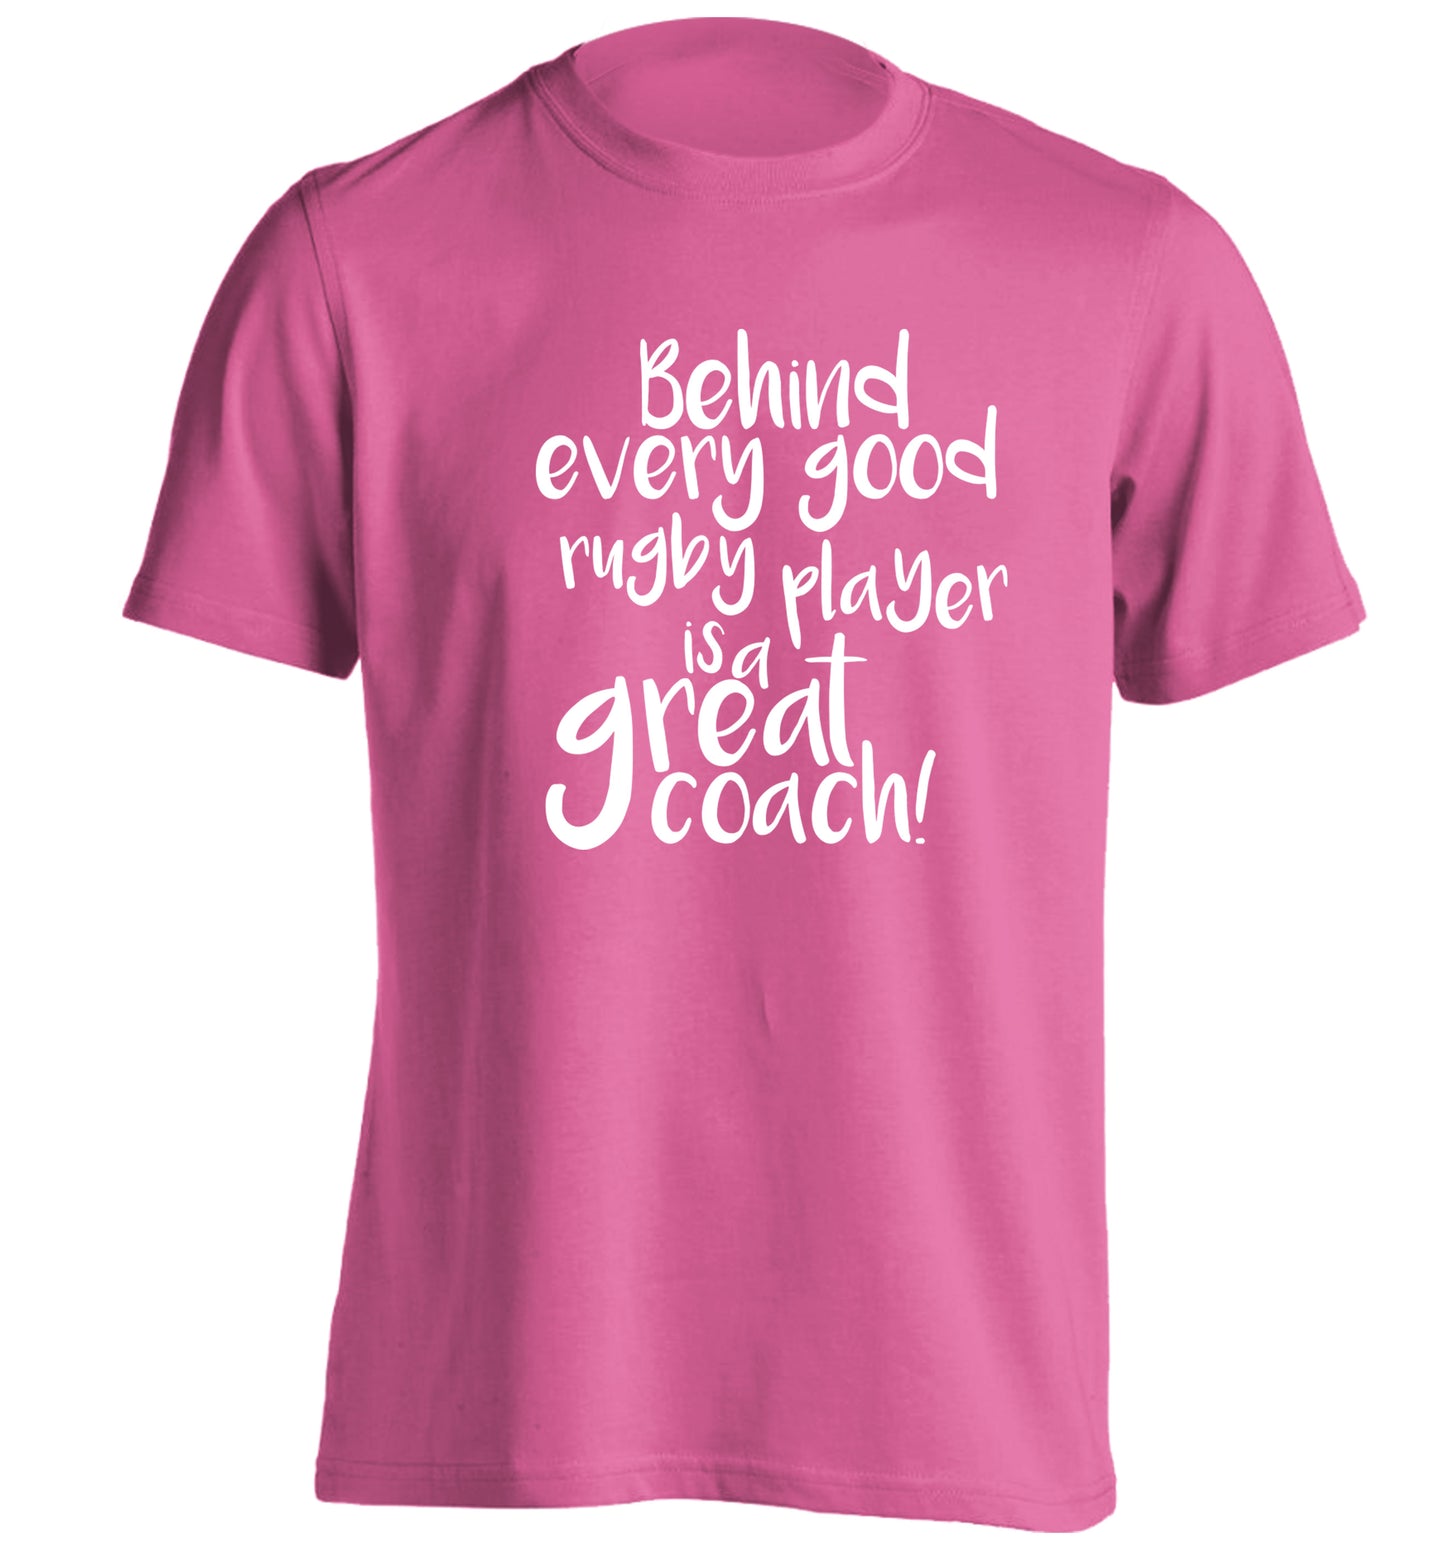 Behind every goor rugby player is a great coach adults unisex pink Tshirt 2XL